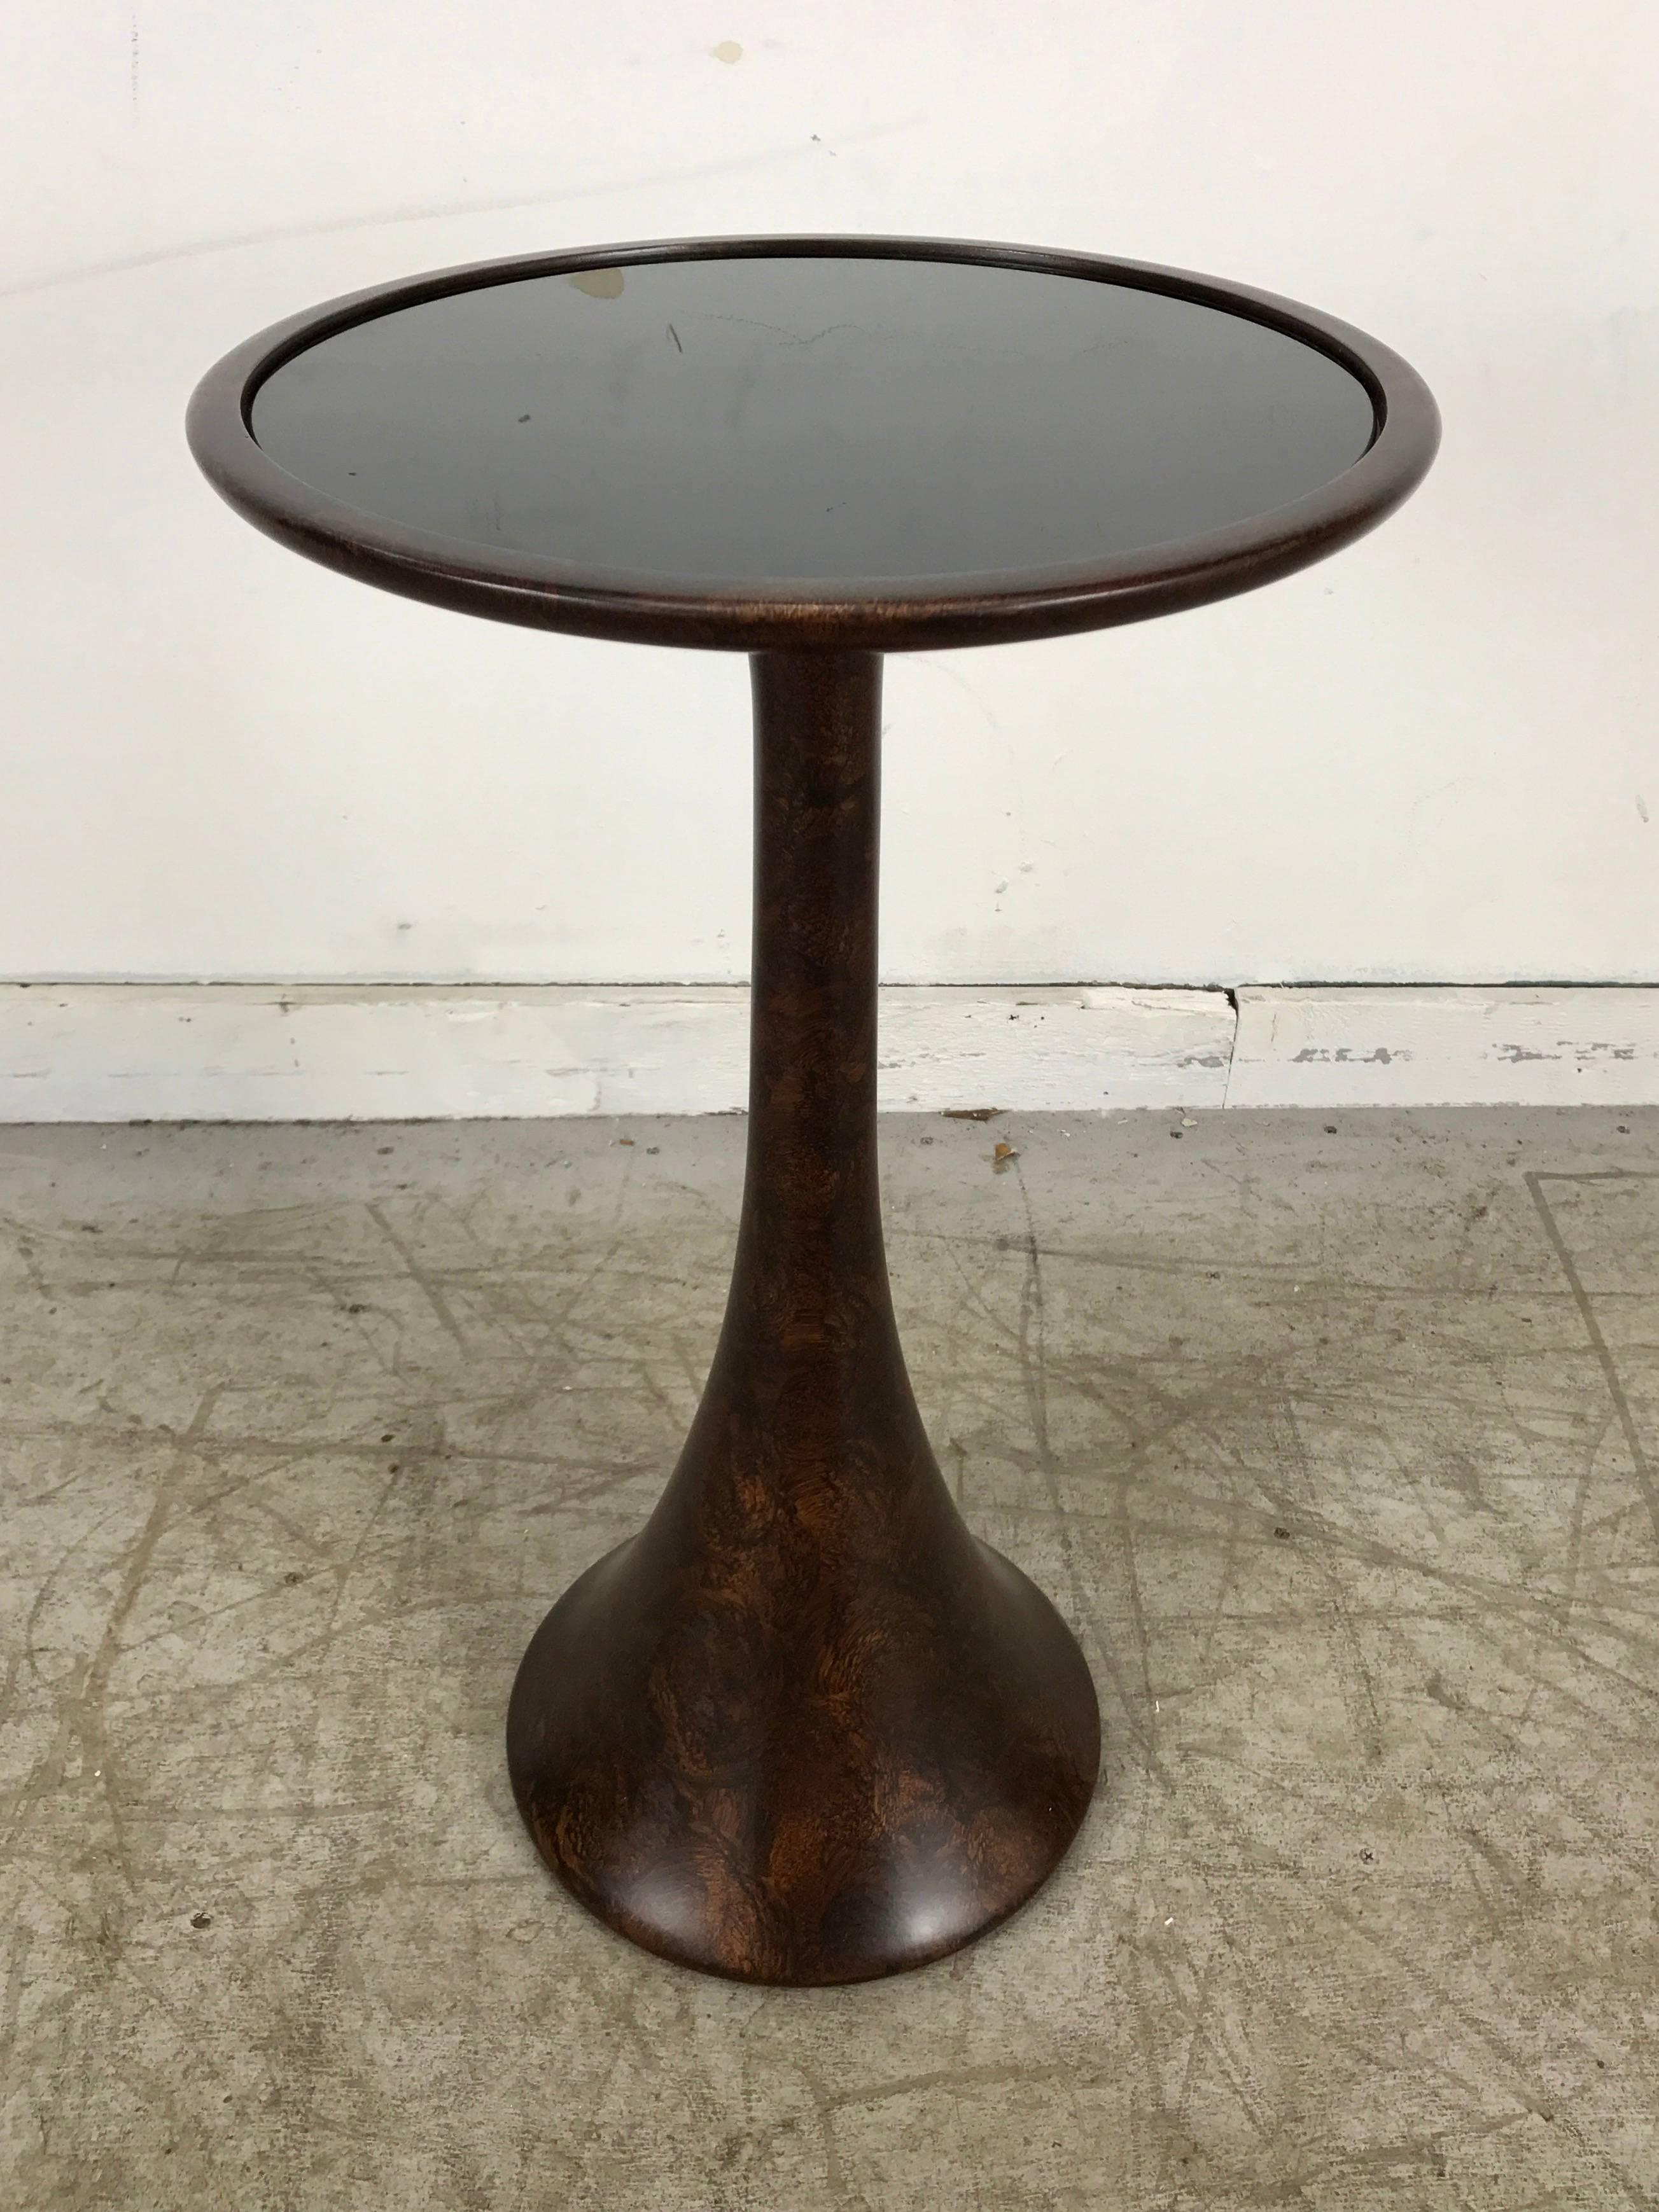 Contemporary modernist trumpet base resin and glass table/pedestal. Stunning modeled faux walnut finish, Black glass insert top. Classic modernist form.